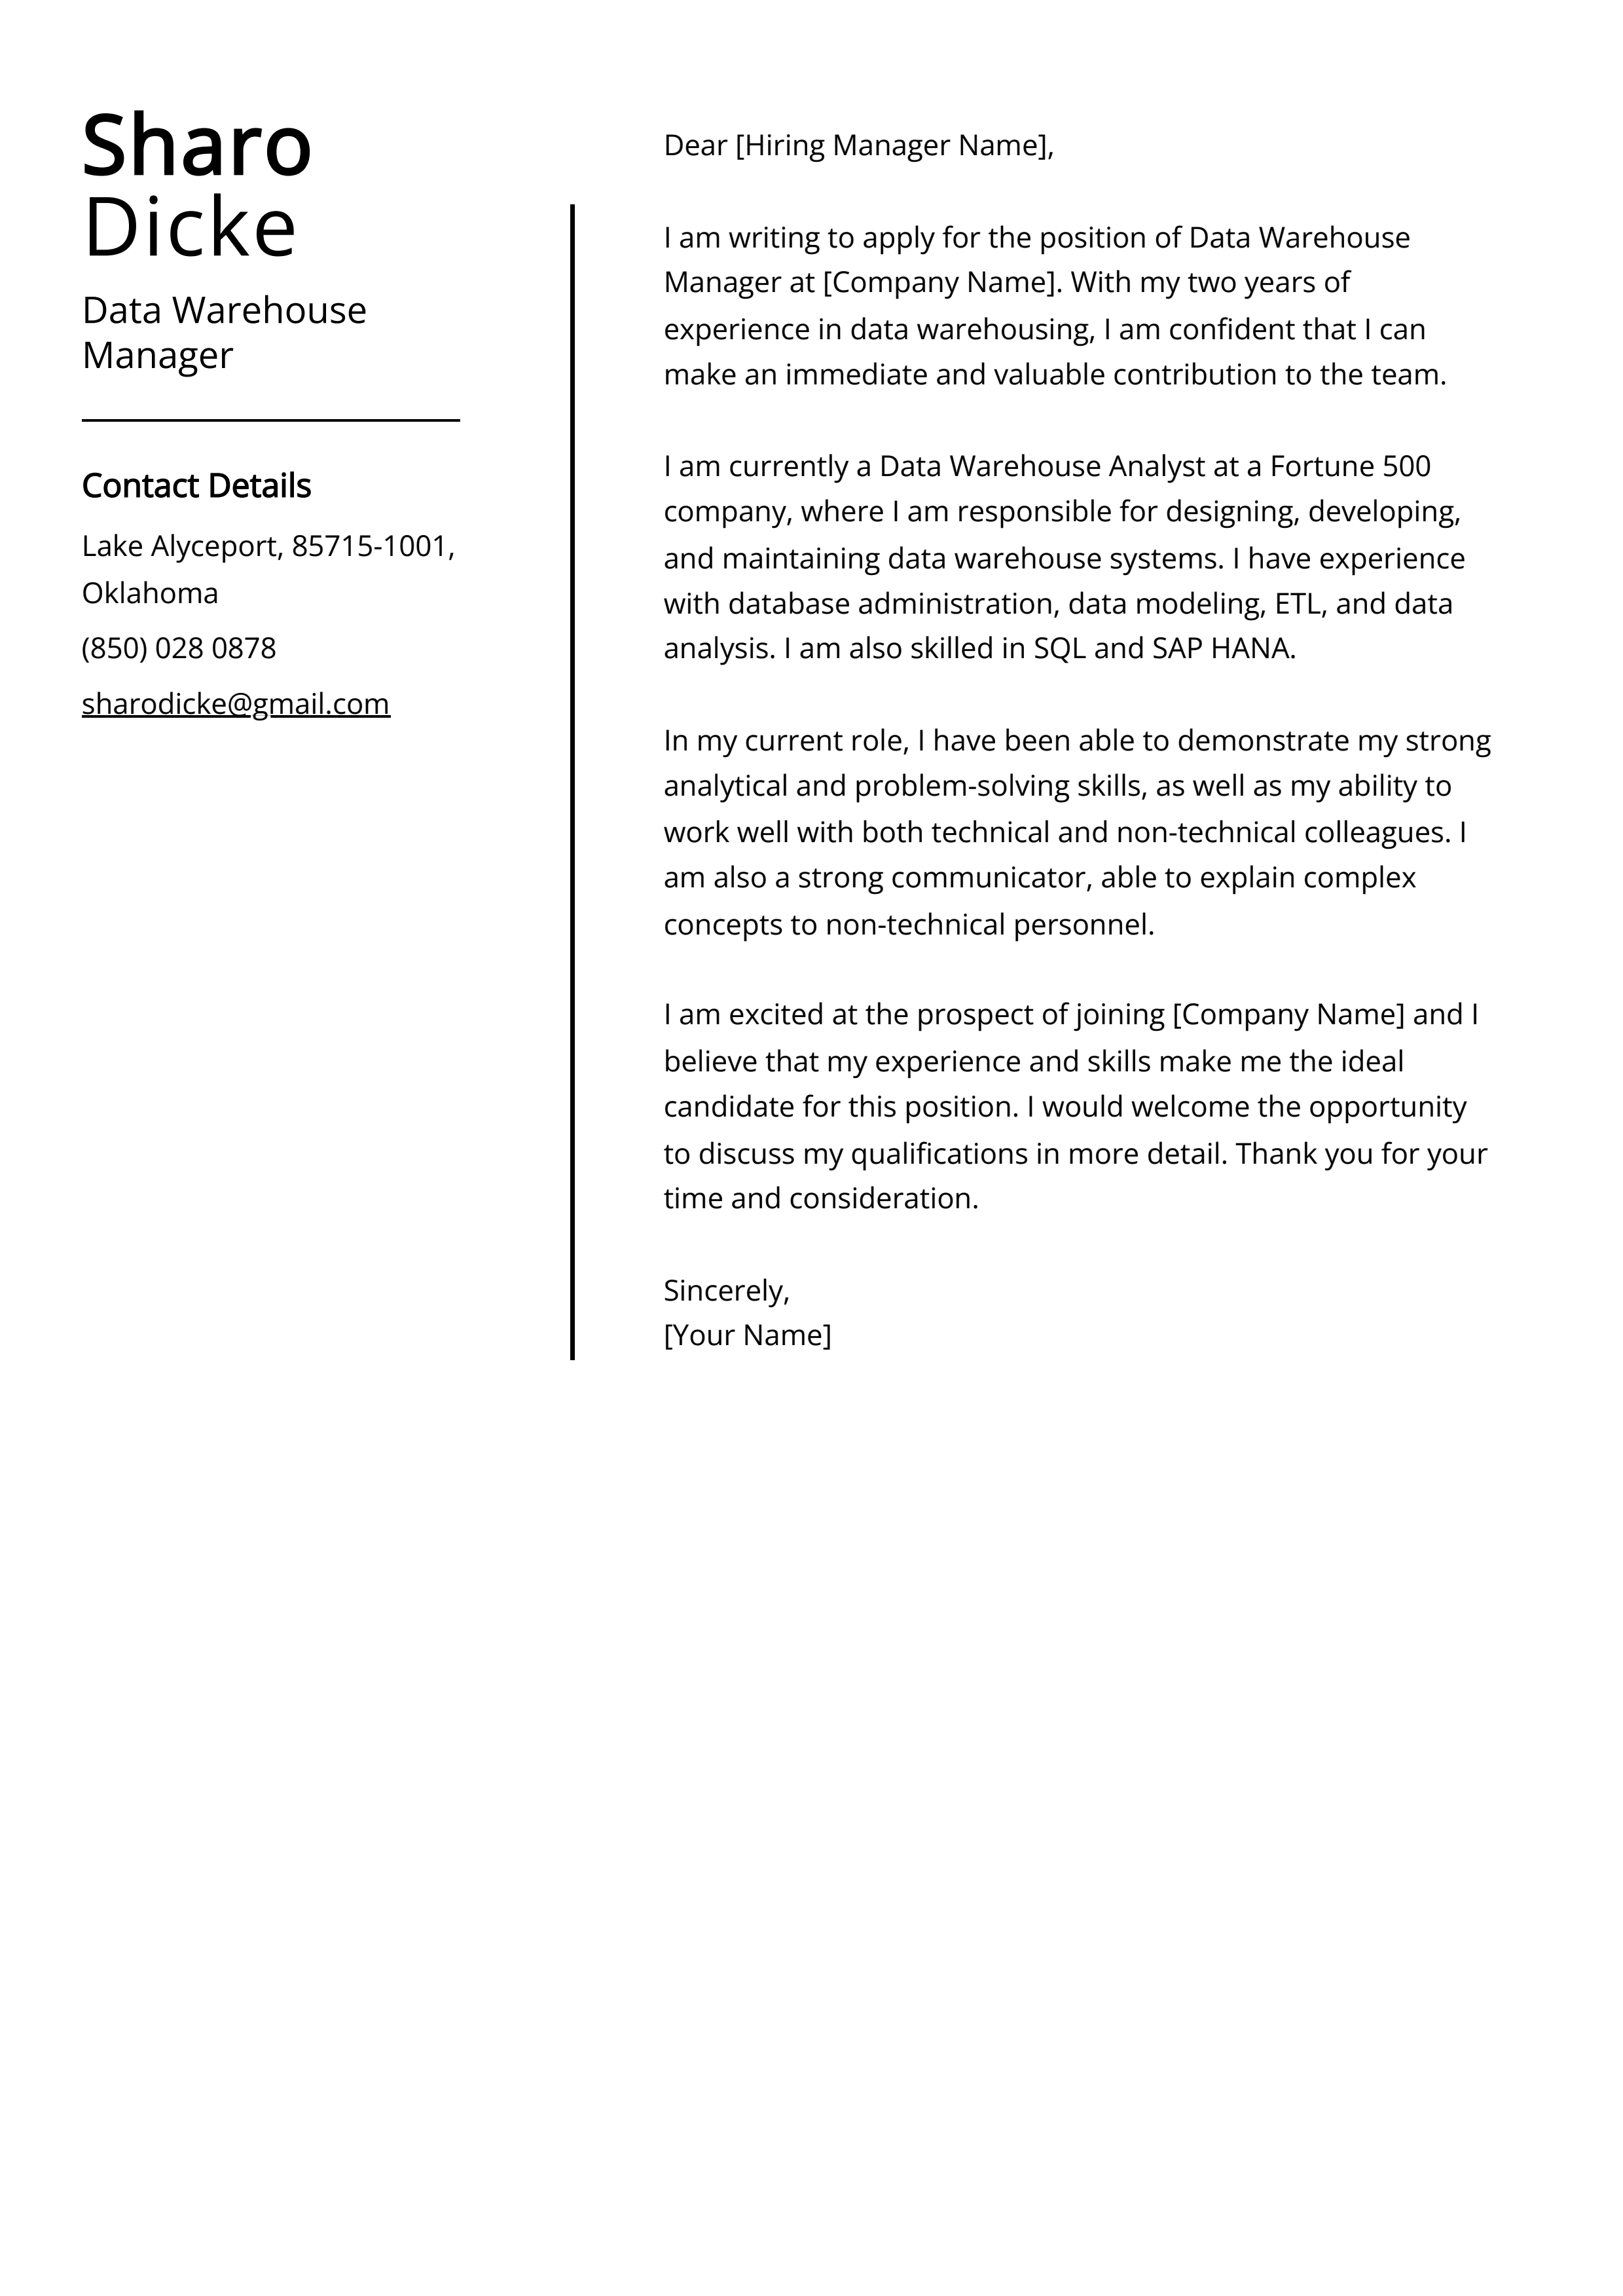 Data Warehouse Manager Cover Letter Example